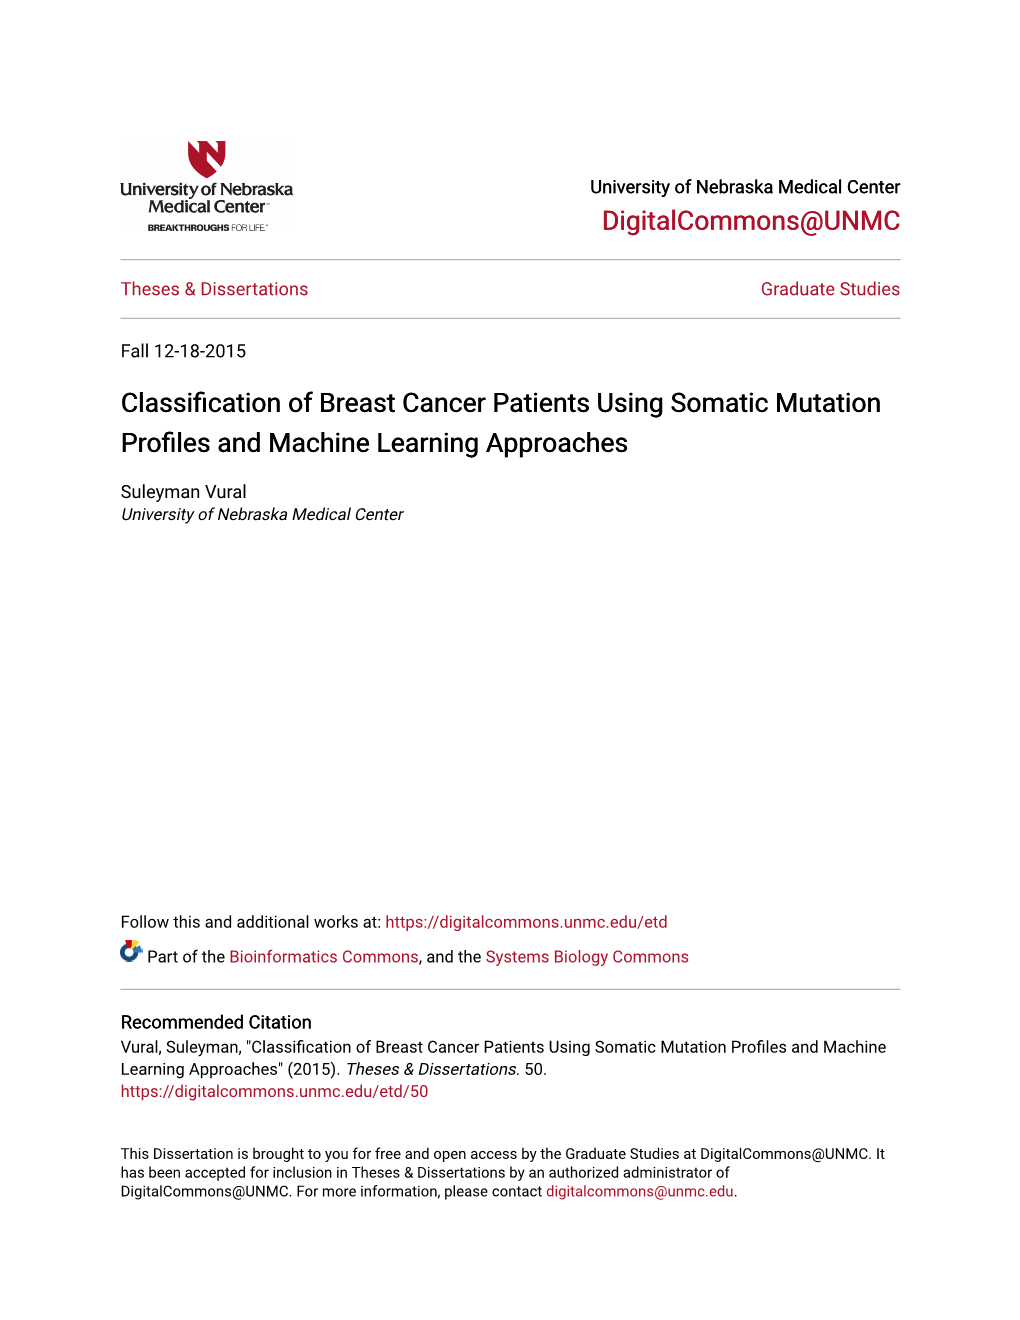 Classification of Breast Cancer Patients Using Somatic Mutation Profiles and Machine Learning Approaches